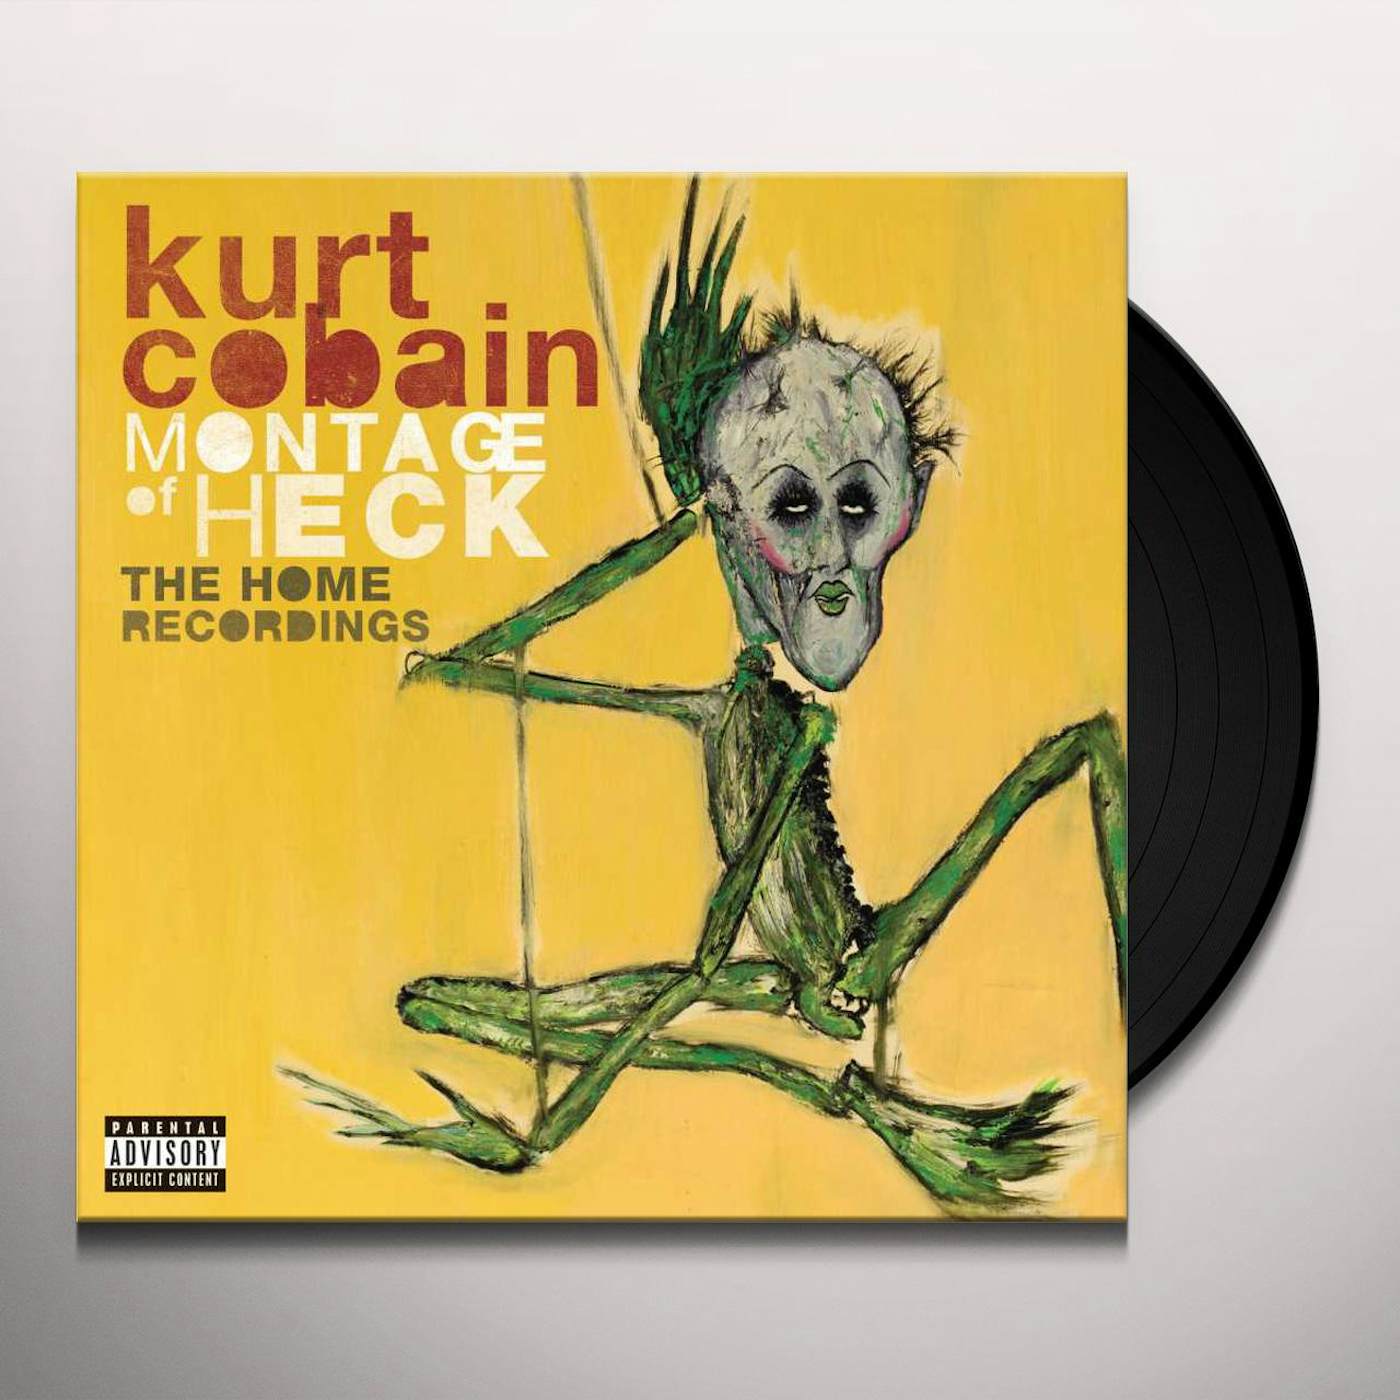 Review: Kurt Cobain, 'Montage of Heck: The Home Recordings